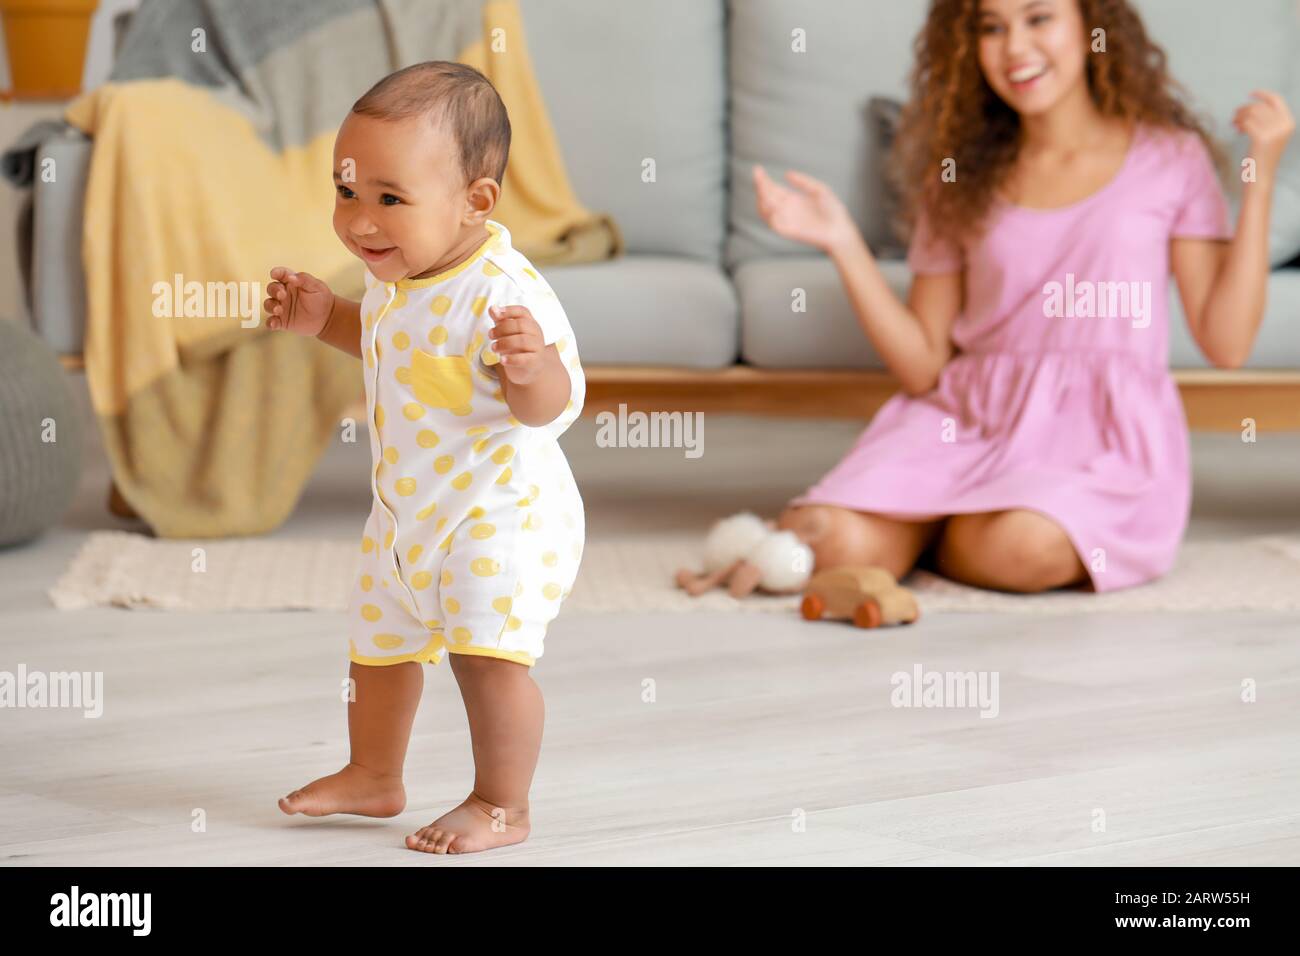 a baby learning to walk